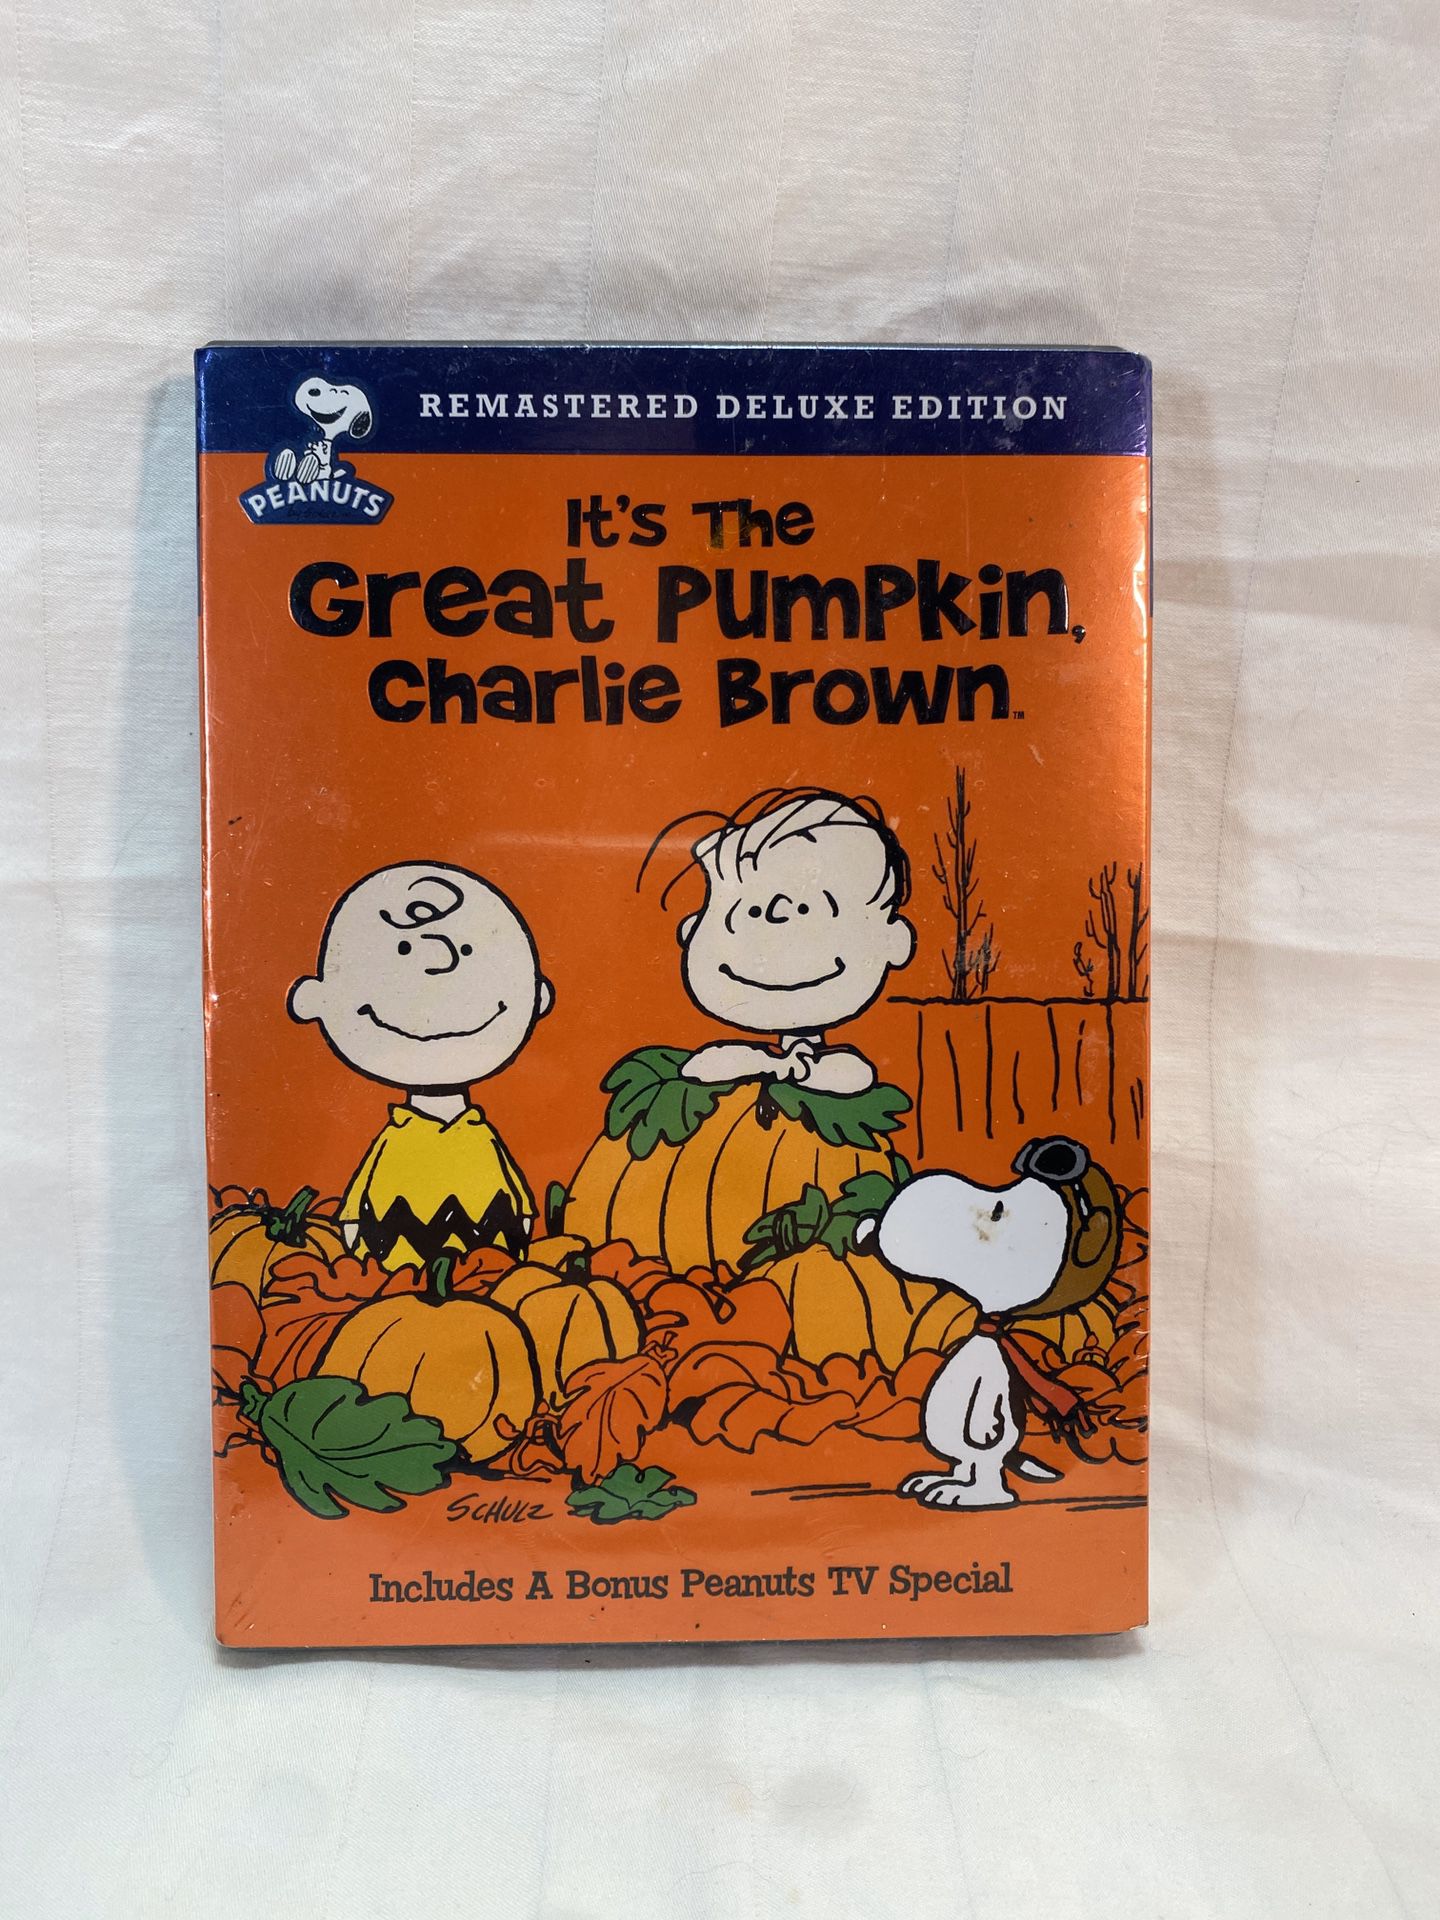 It's The Great Pumpkin Charlie Brown DVD Remastered Deluxe Edition 1966/2008